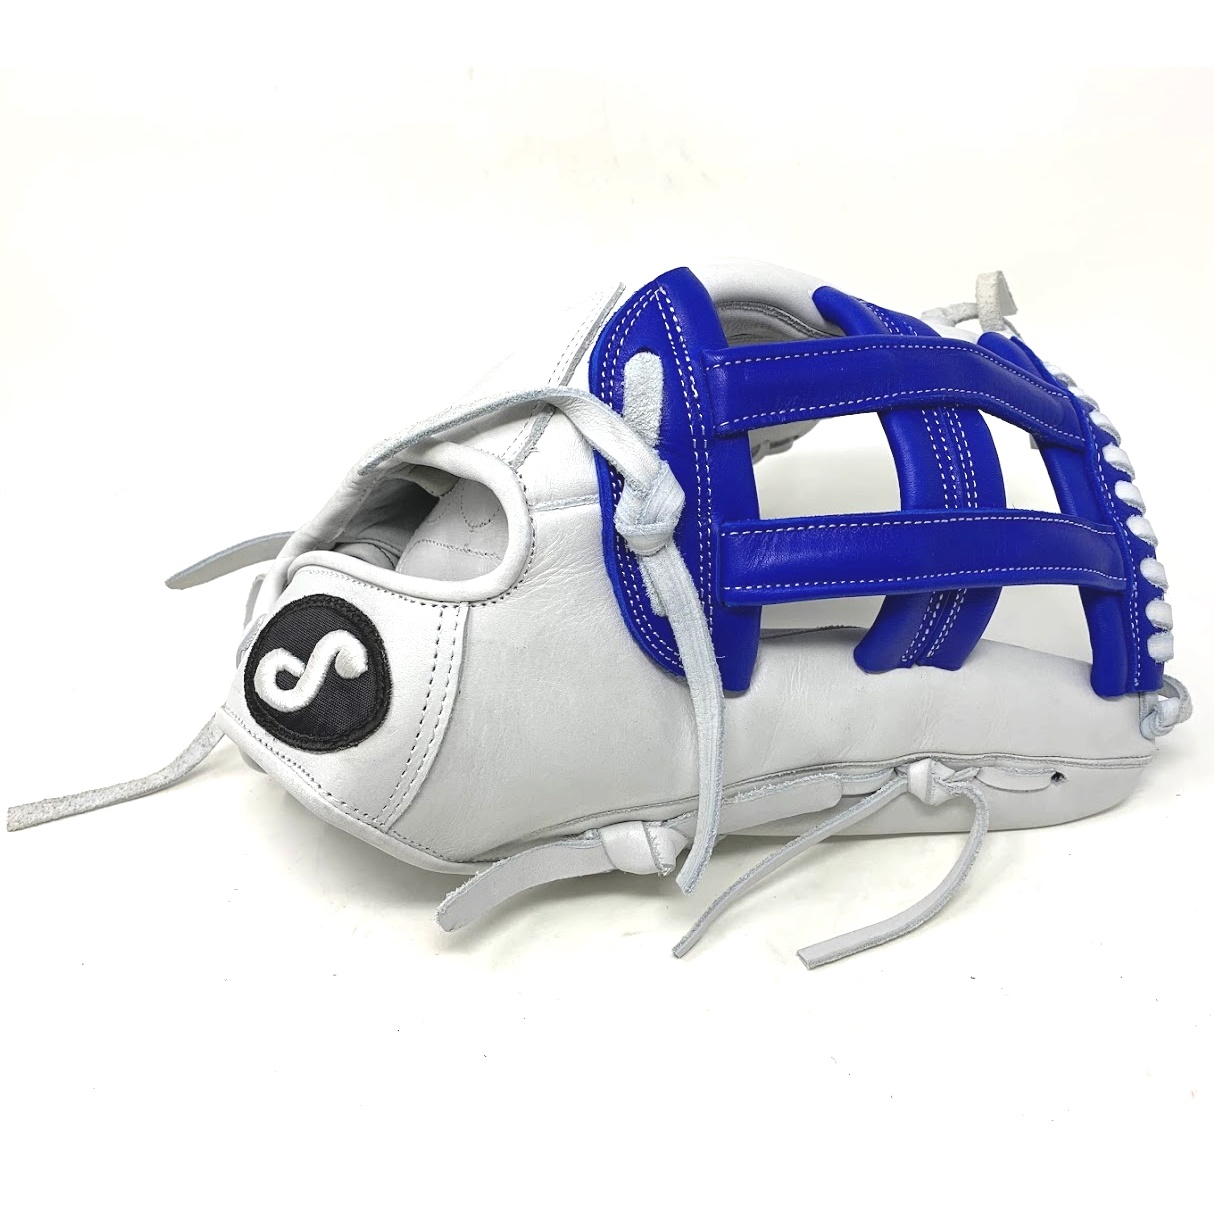 soto-white-14-inch-h-web-slow-pitch-softball-glove-right-hand-throw SS20-14-WHRY-H-RightHandThrow soto  <strong><span style=font-size medium;>Made in Mexico</span></strong>   <img class=__mce_add_custom__ title=mexico-flag-50.jpg src=  